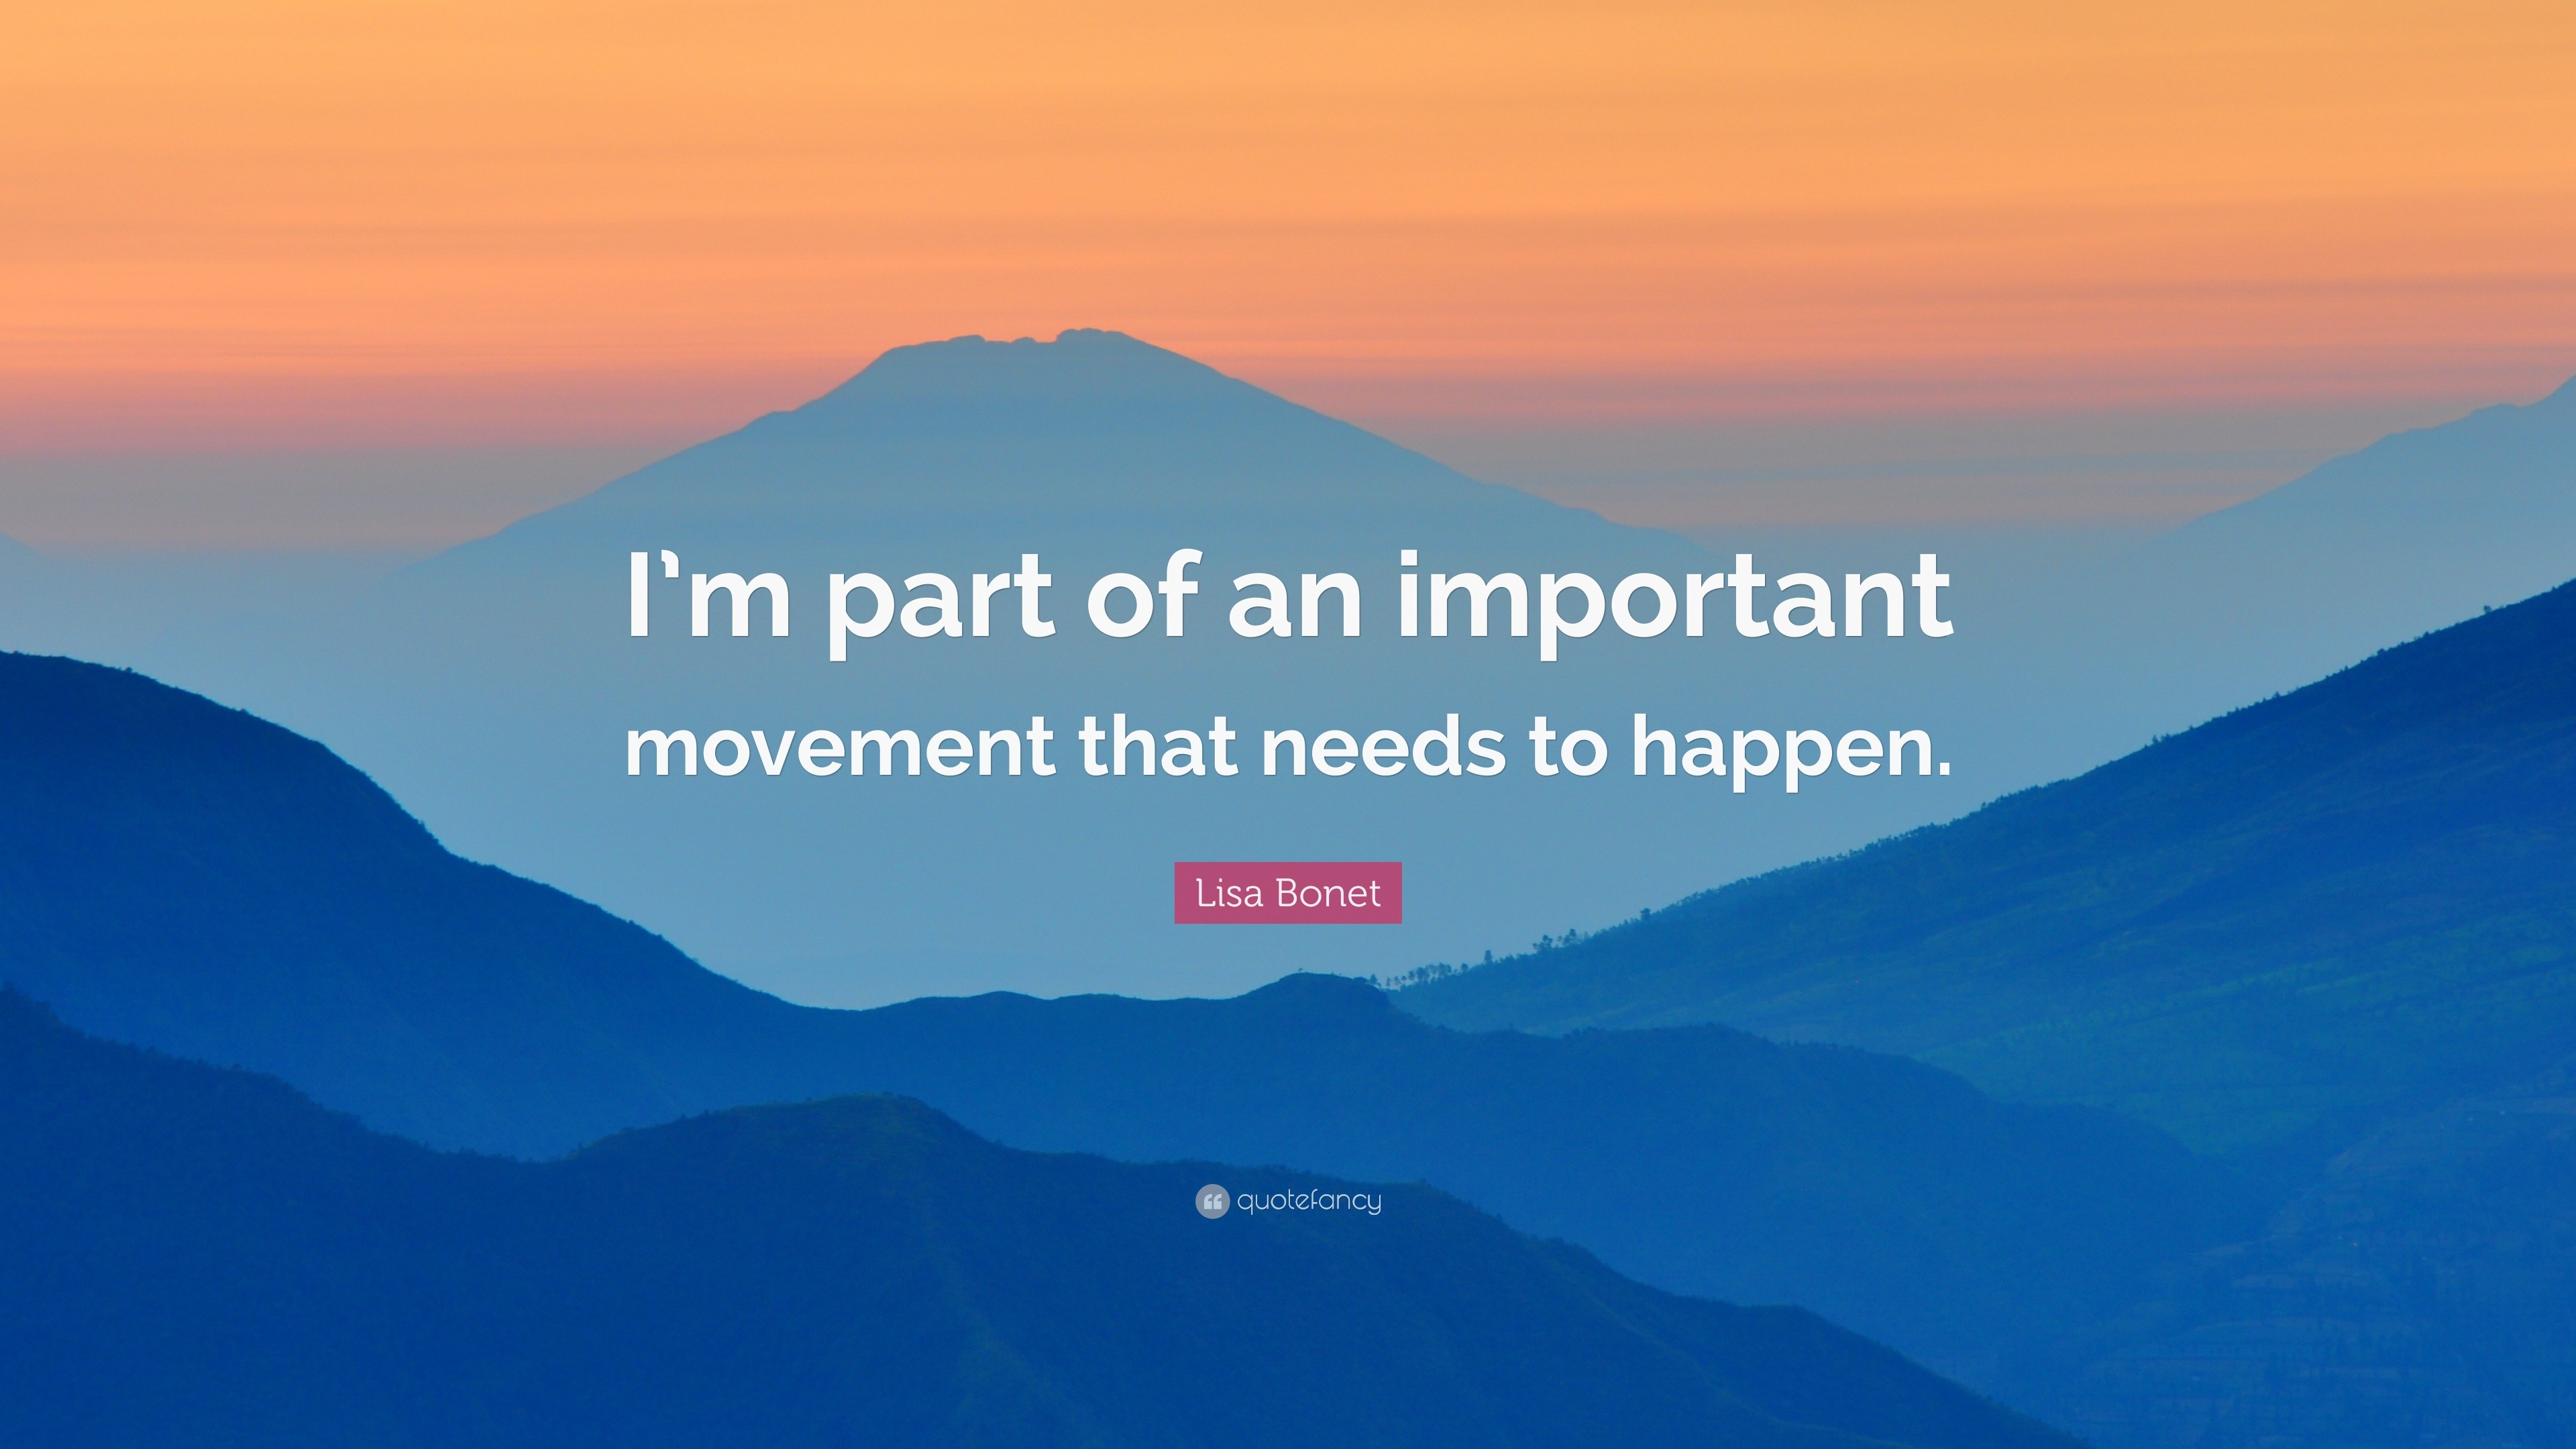 Lisa Bonet Quote: “I’m part of an important movement that needs to happen.”